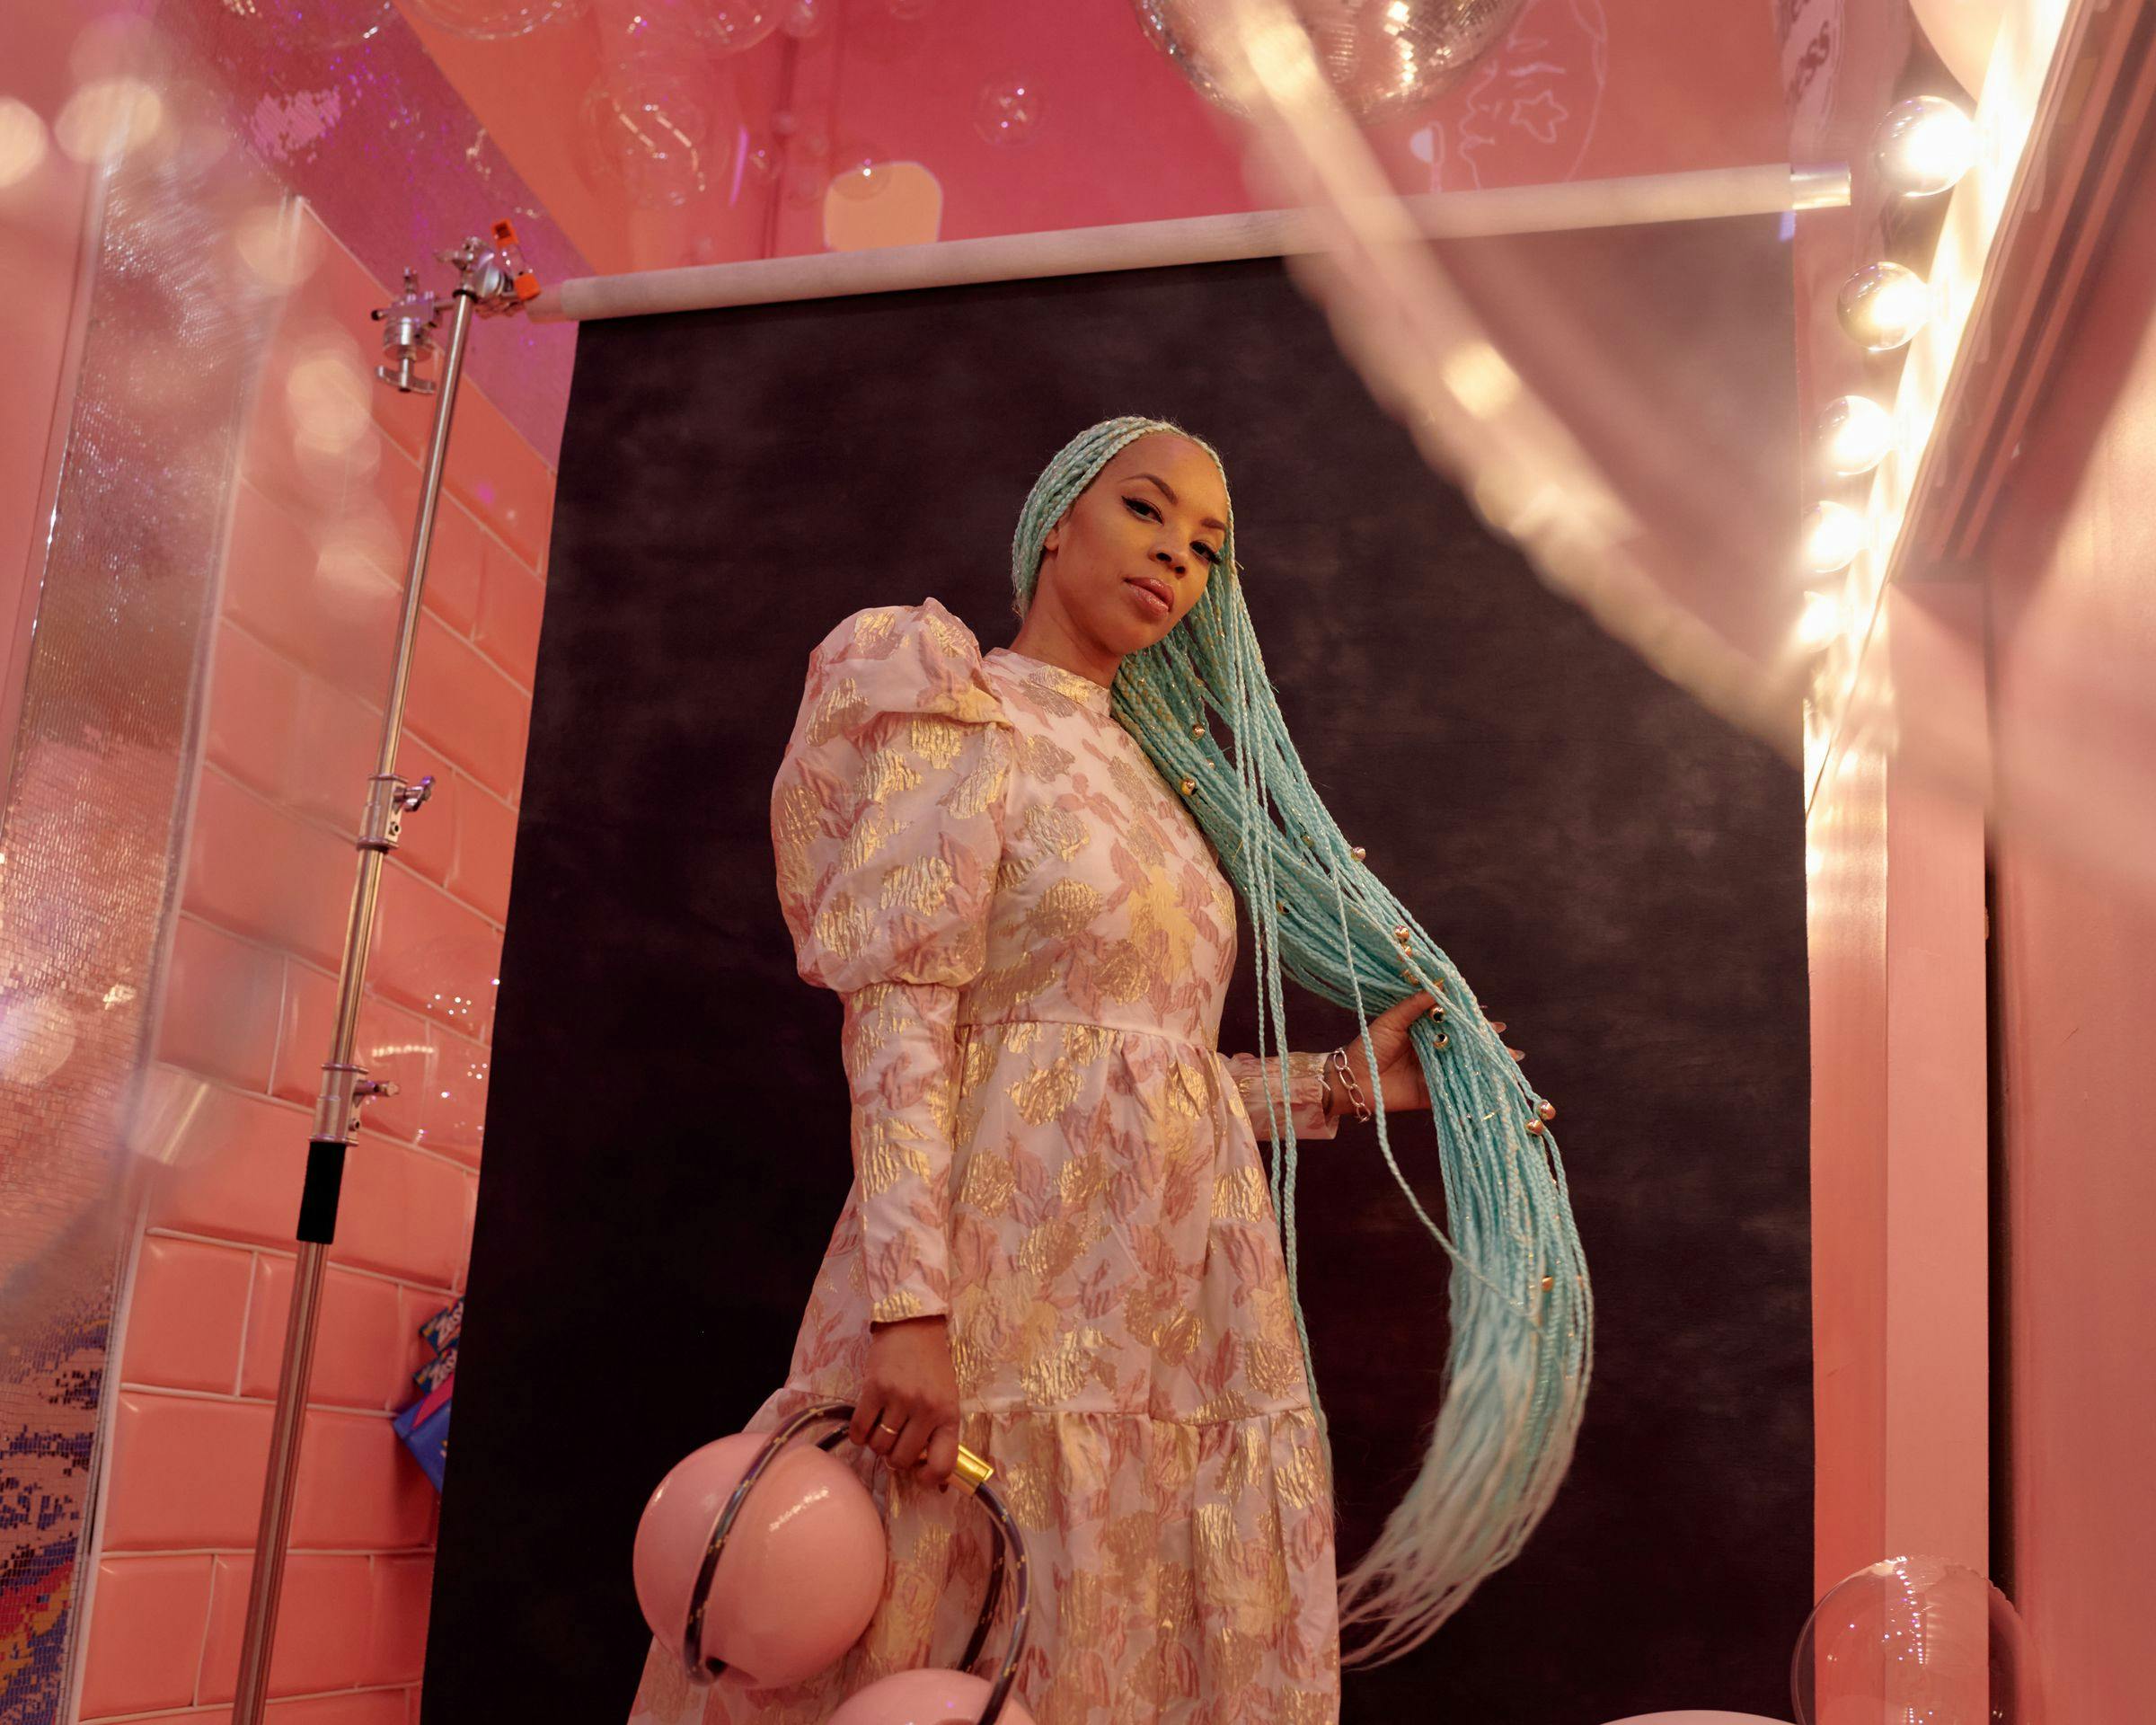 Woman with blue hair in a pink room